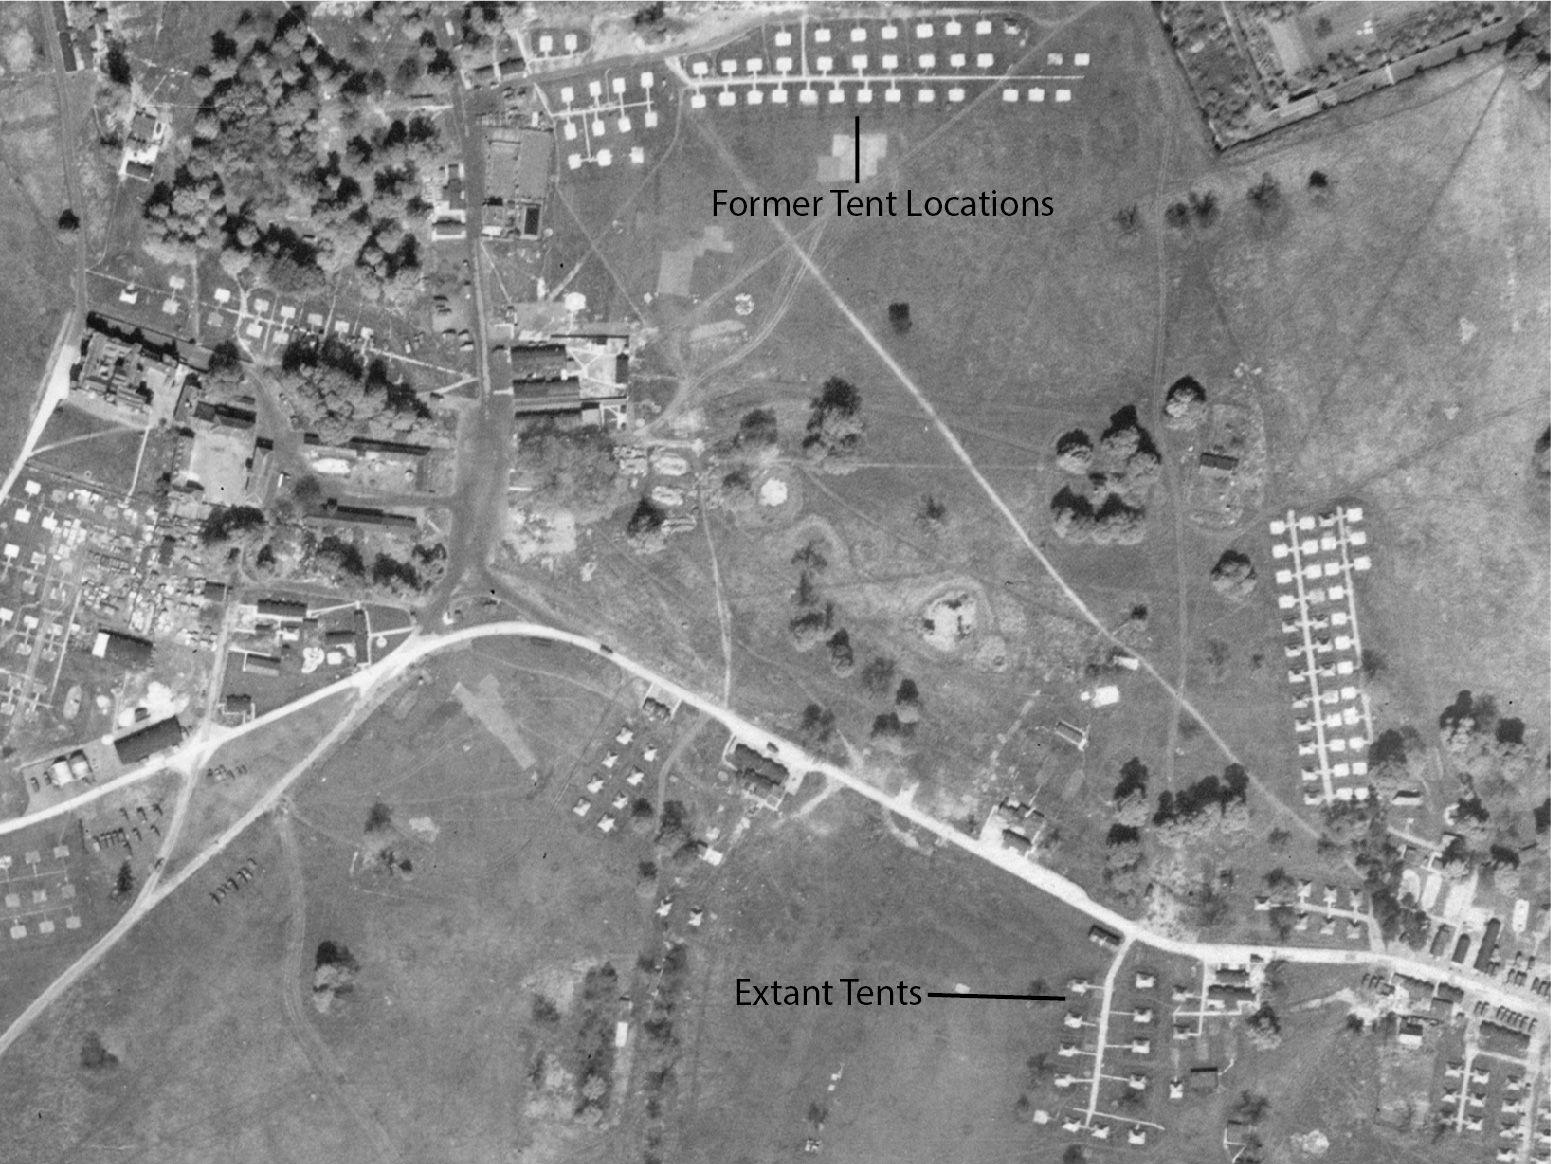 An aerial photograph showing the military camp at Belhus Park in 1946, with the location of standing tents and the former location of others annotated. (Historic England Archive/ PA)